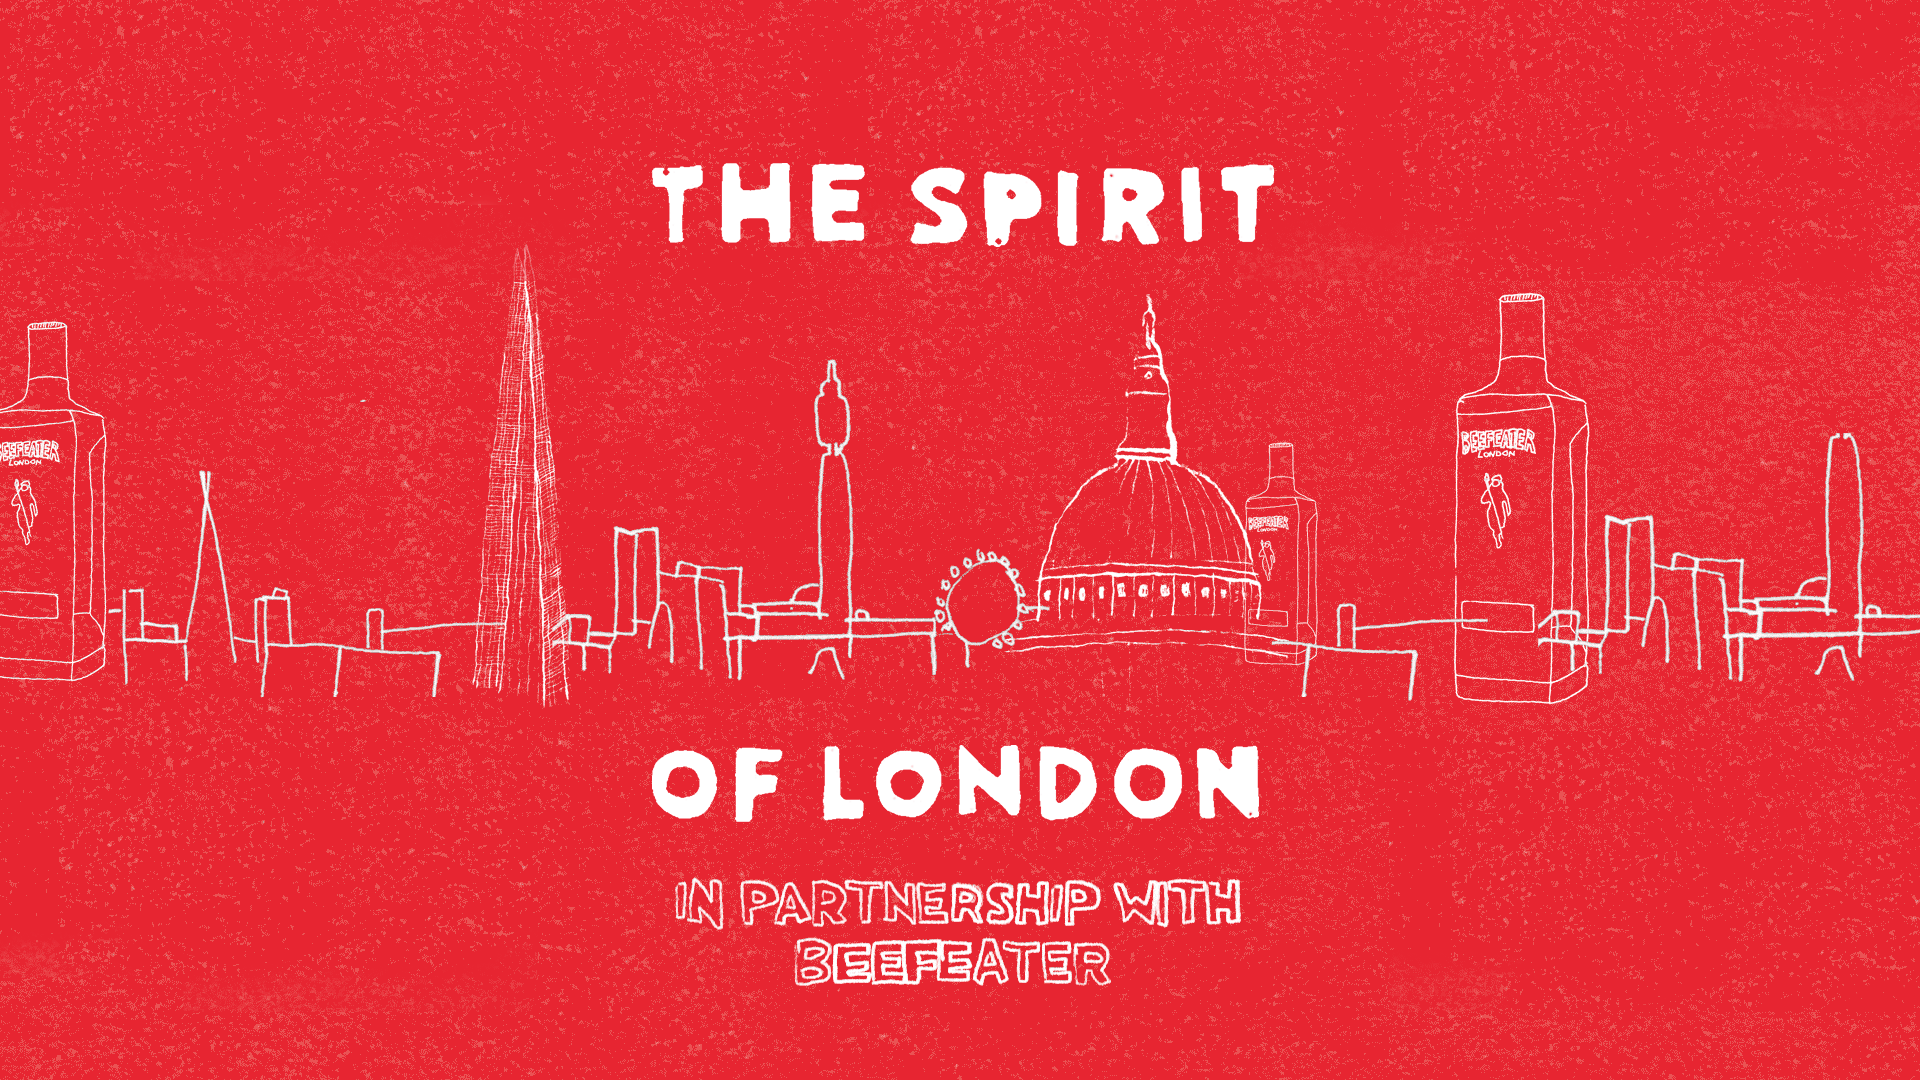 The Spirit of London - In partnership with Beefeater